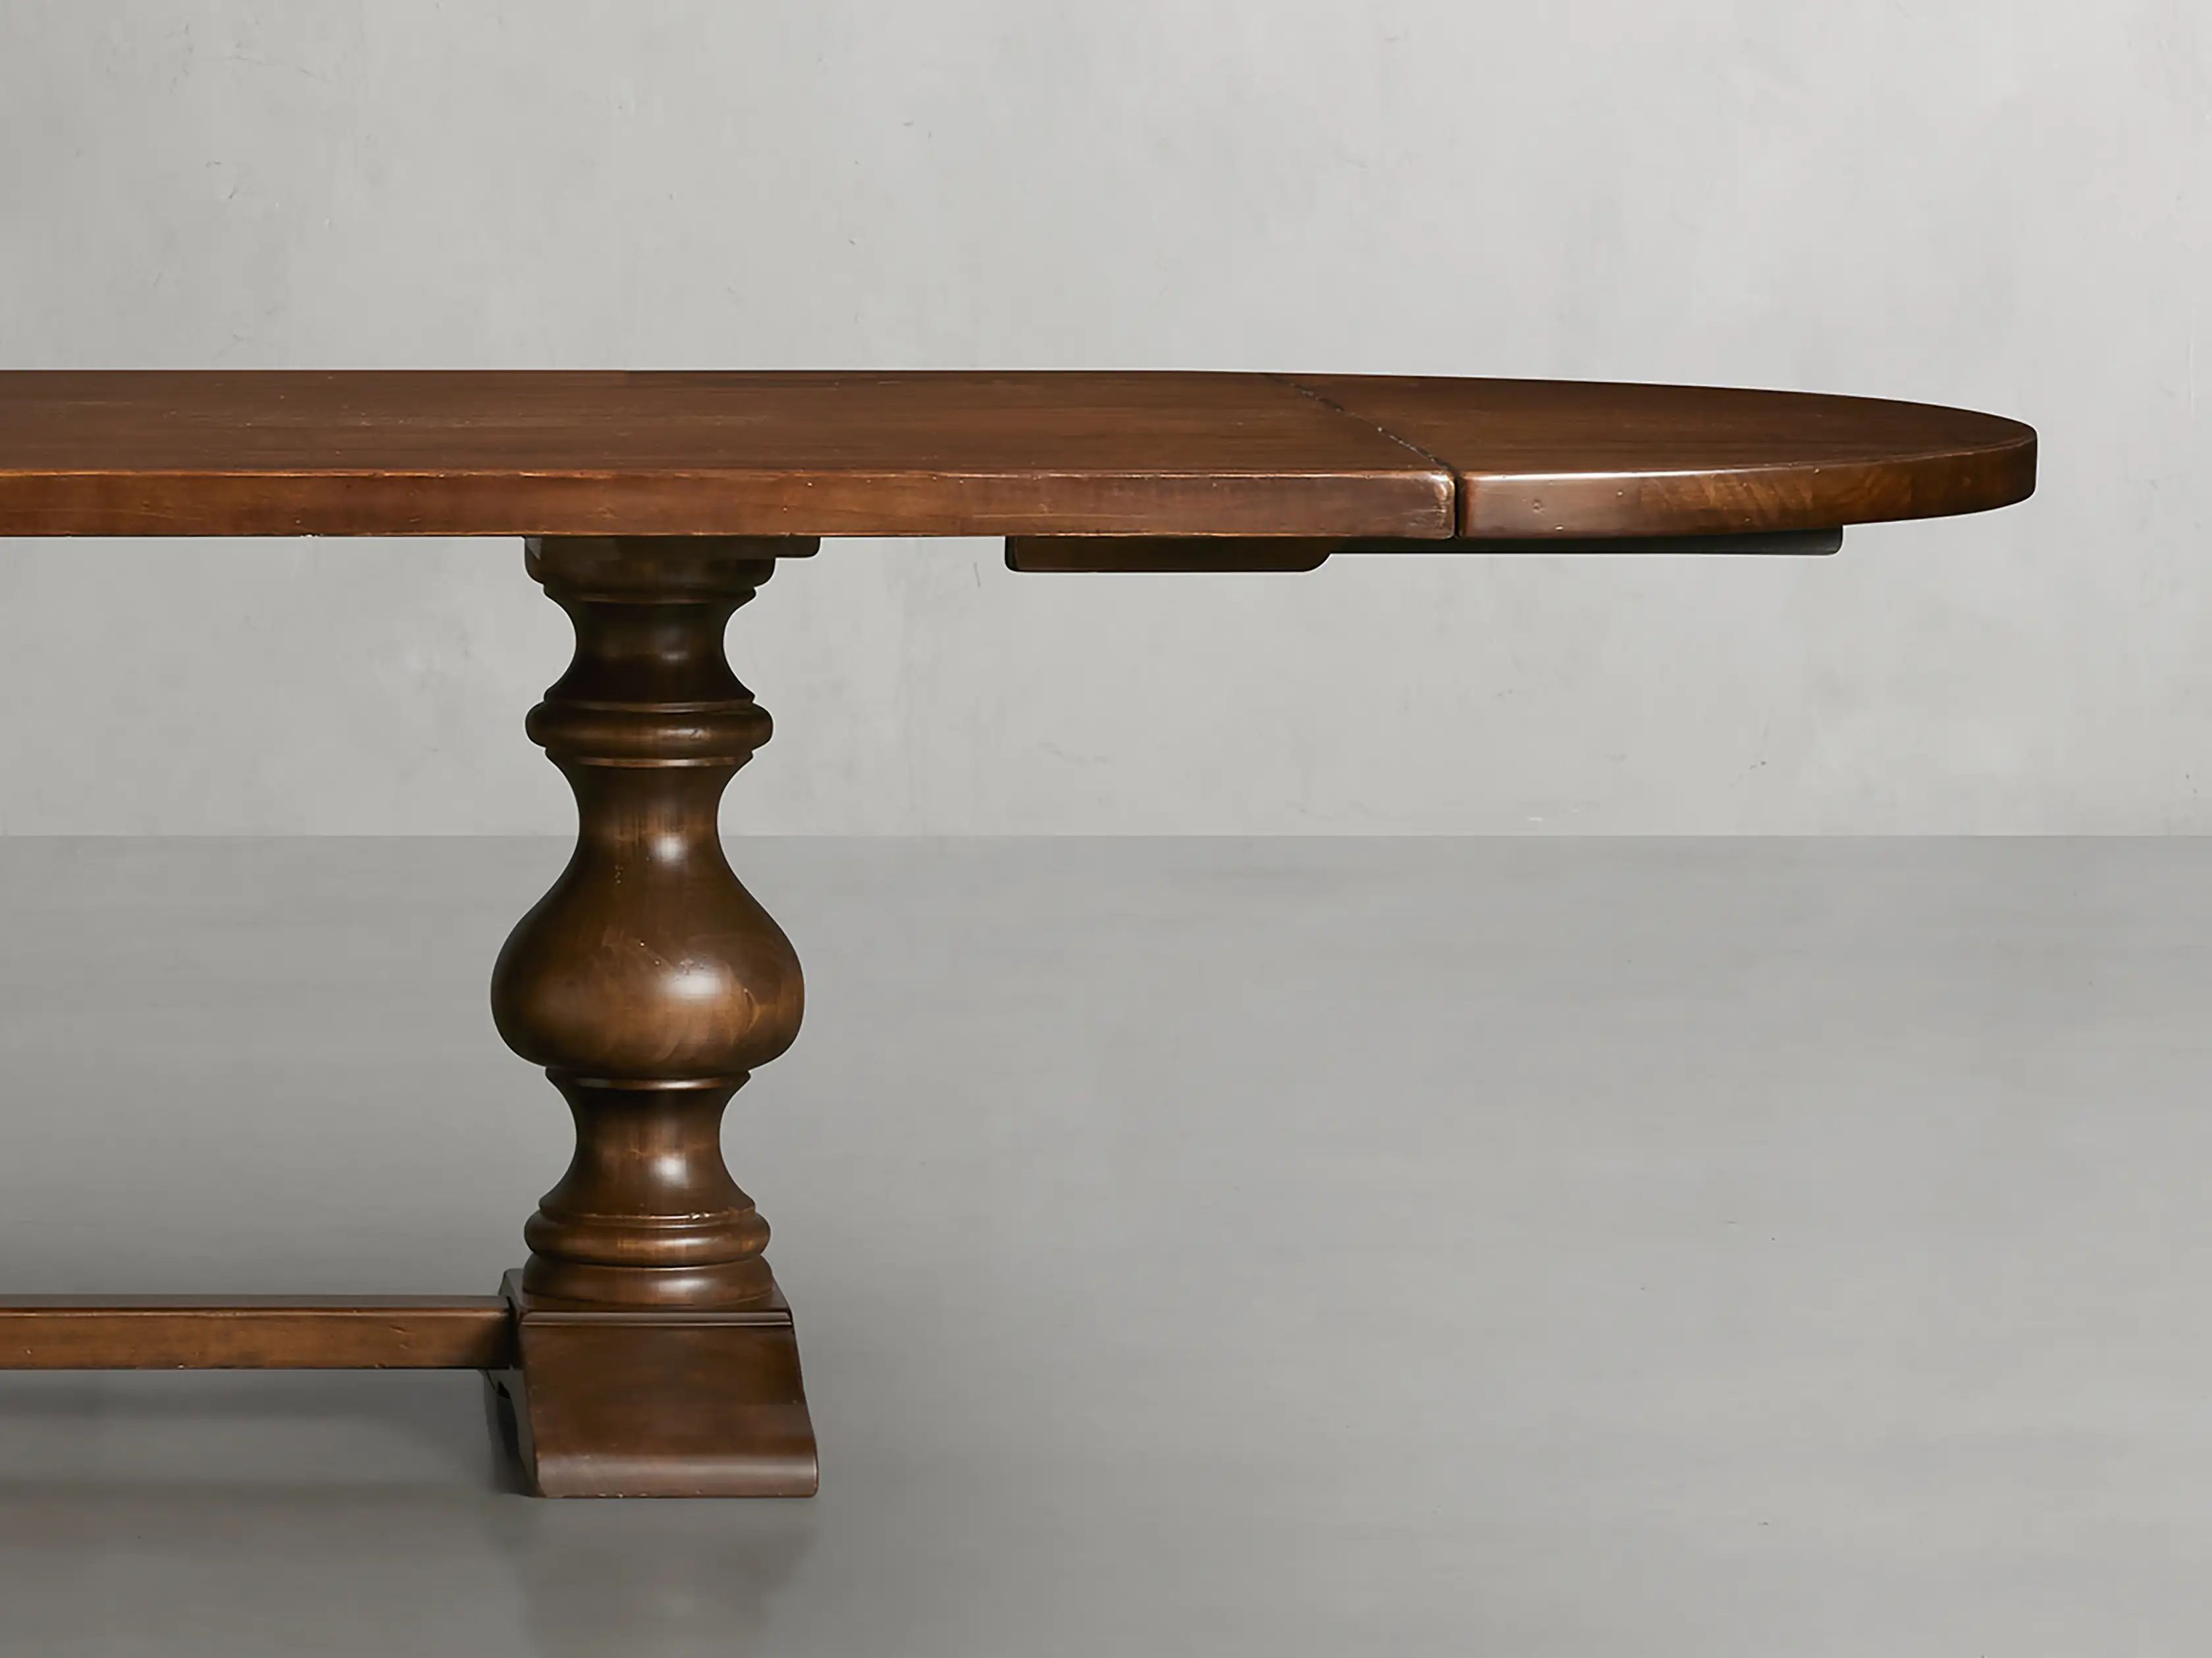 Tuscany Oval Extension Dining Table | Arhaus